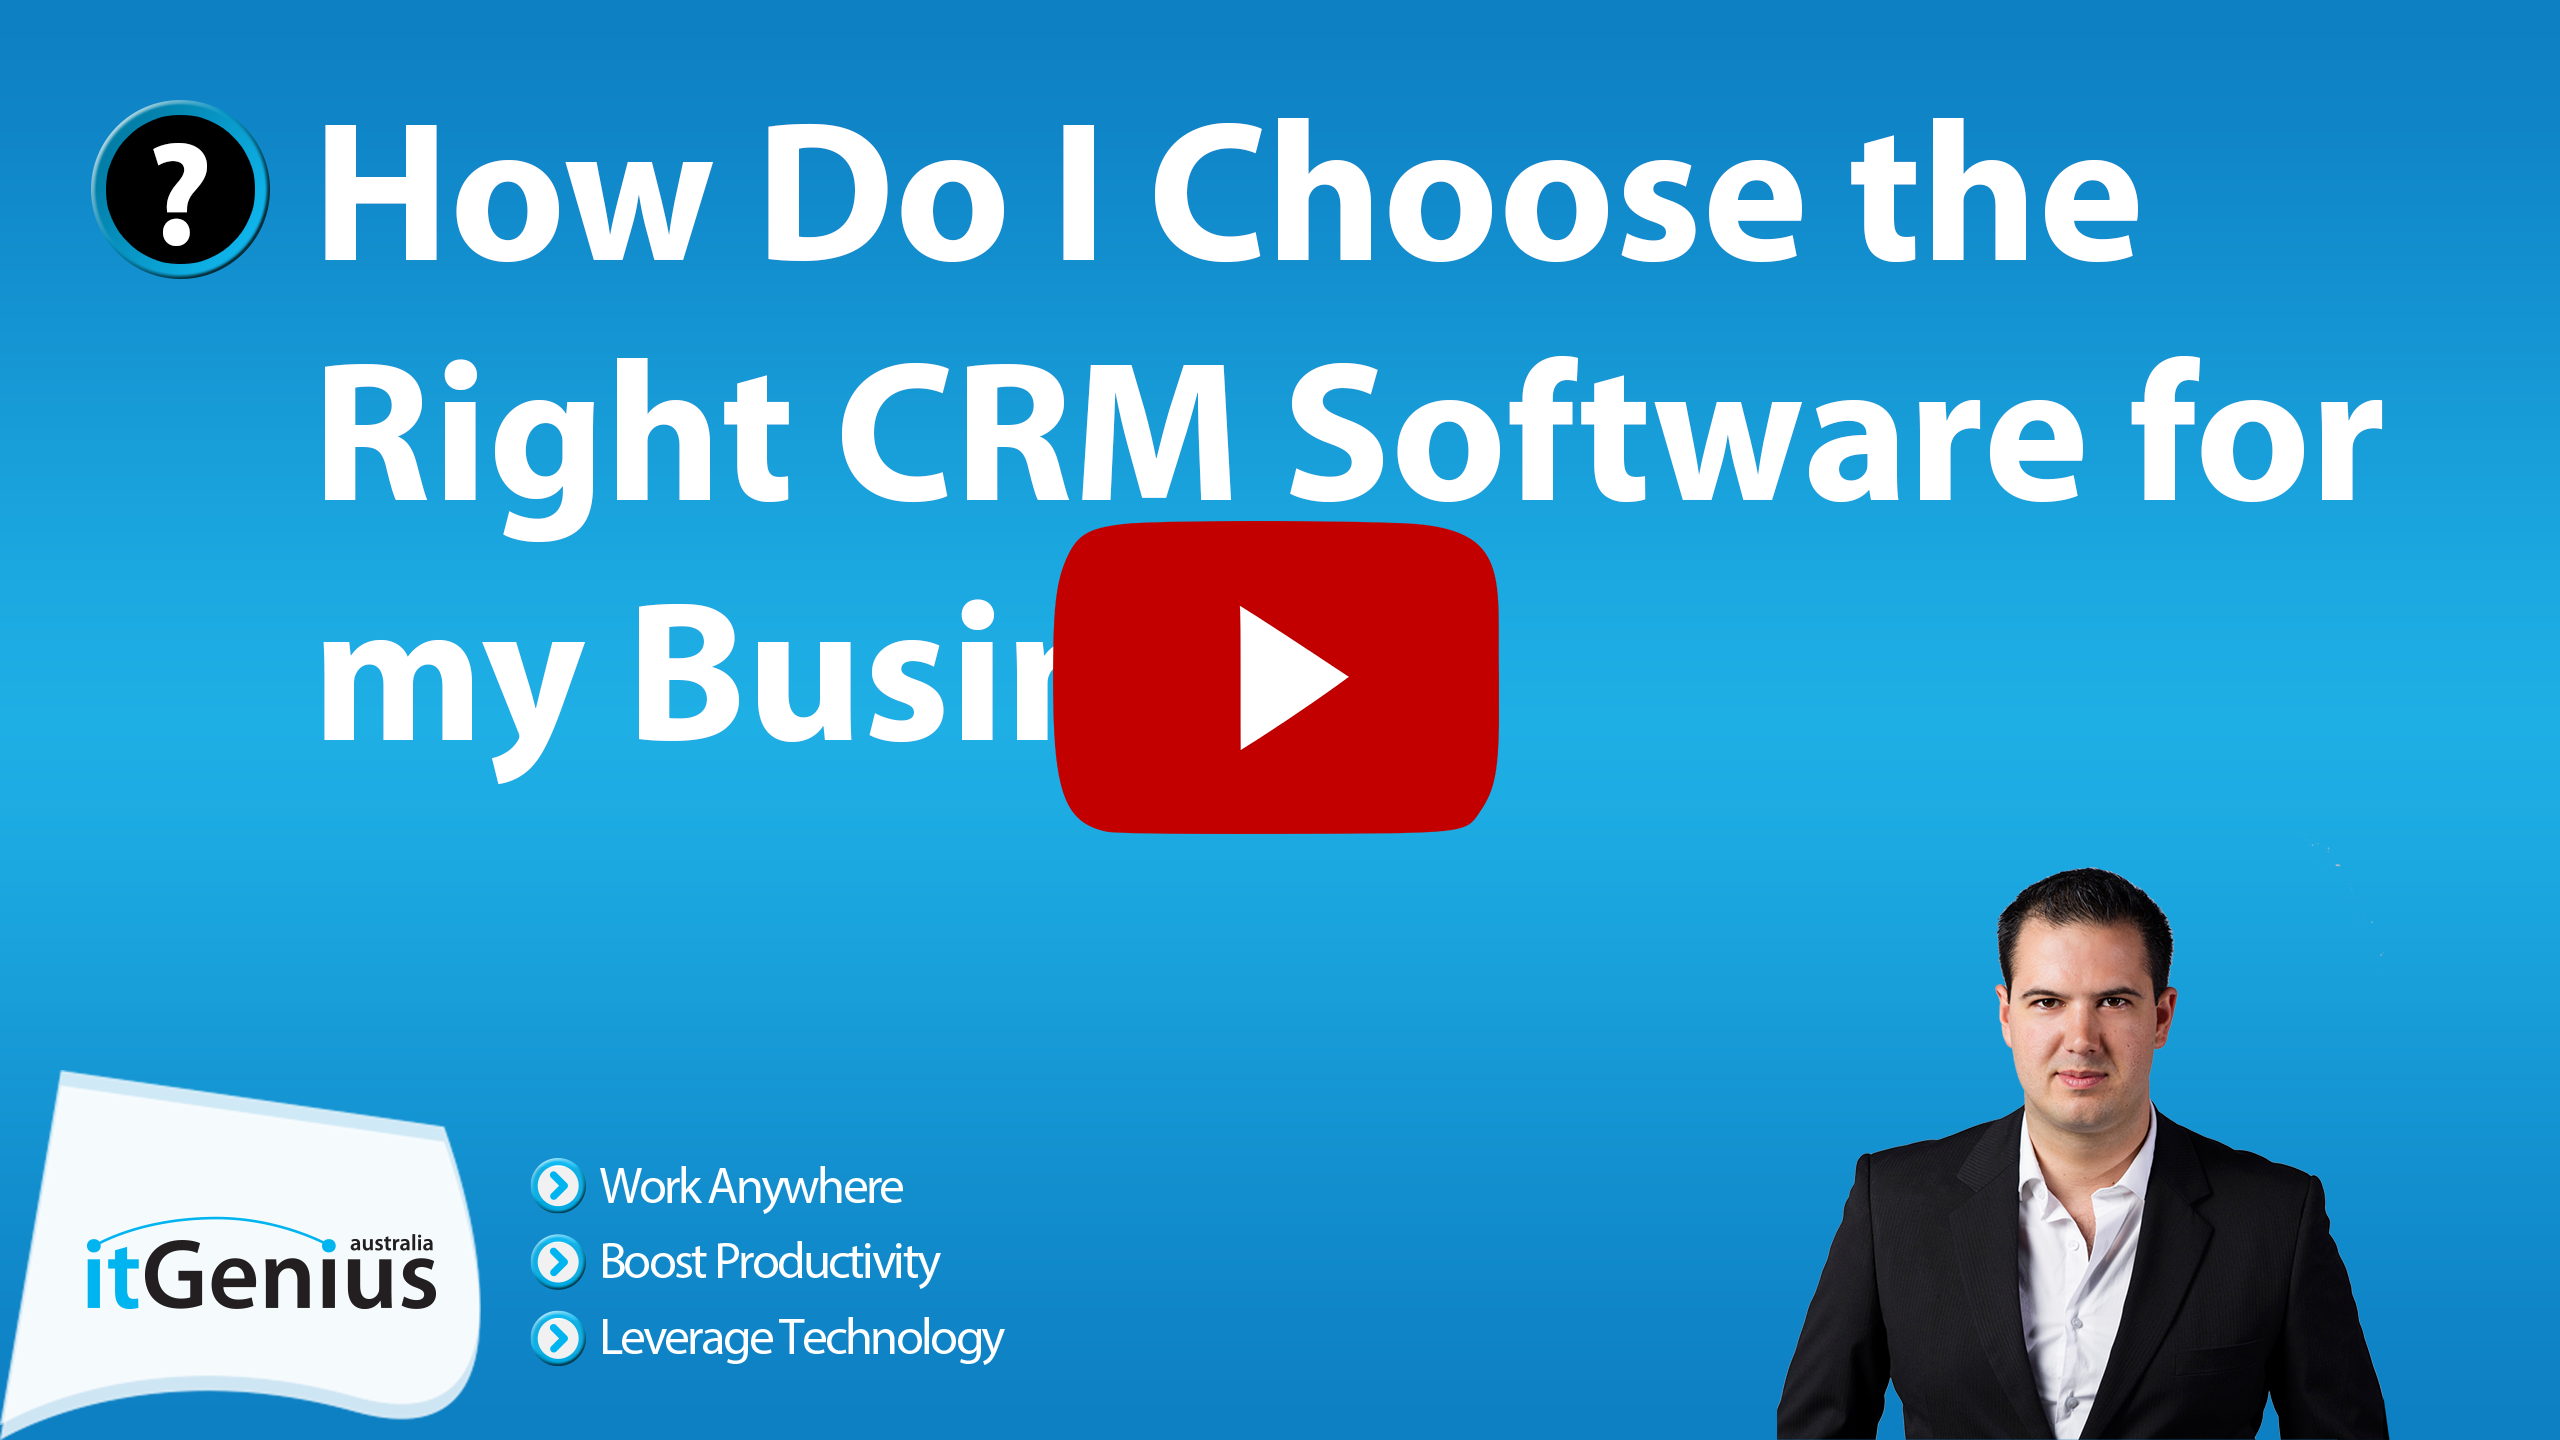 How Do I Choose the Right CRM Software for my Business?